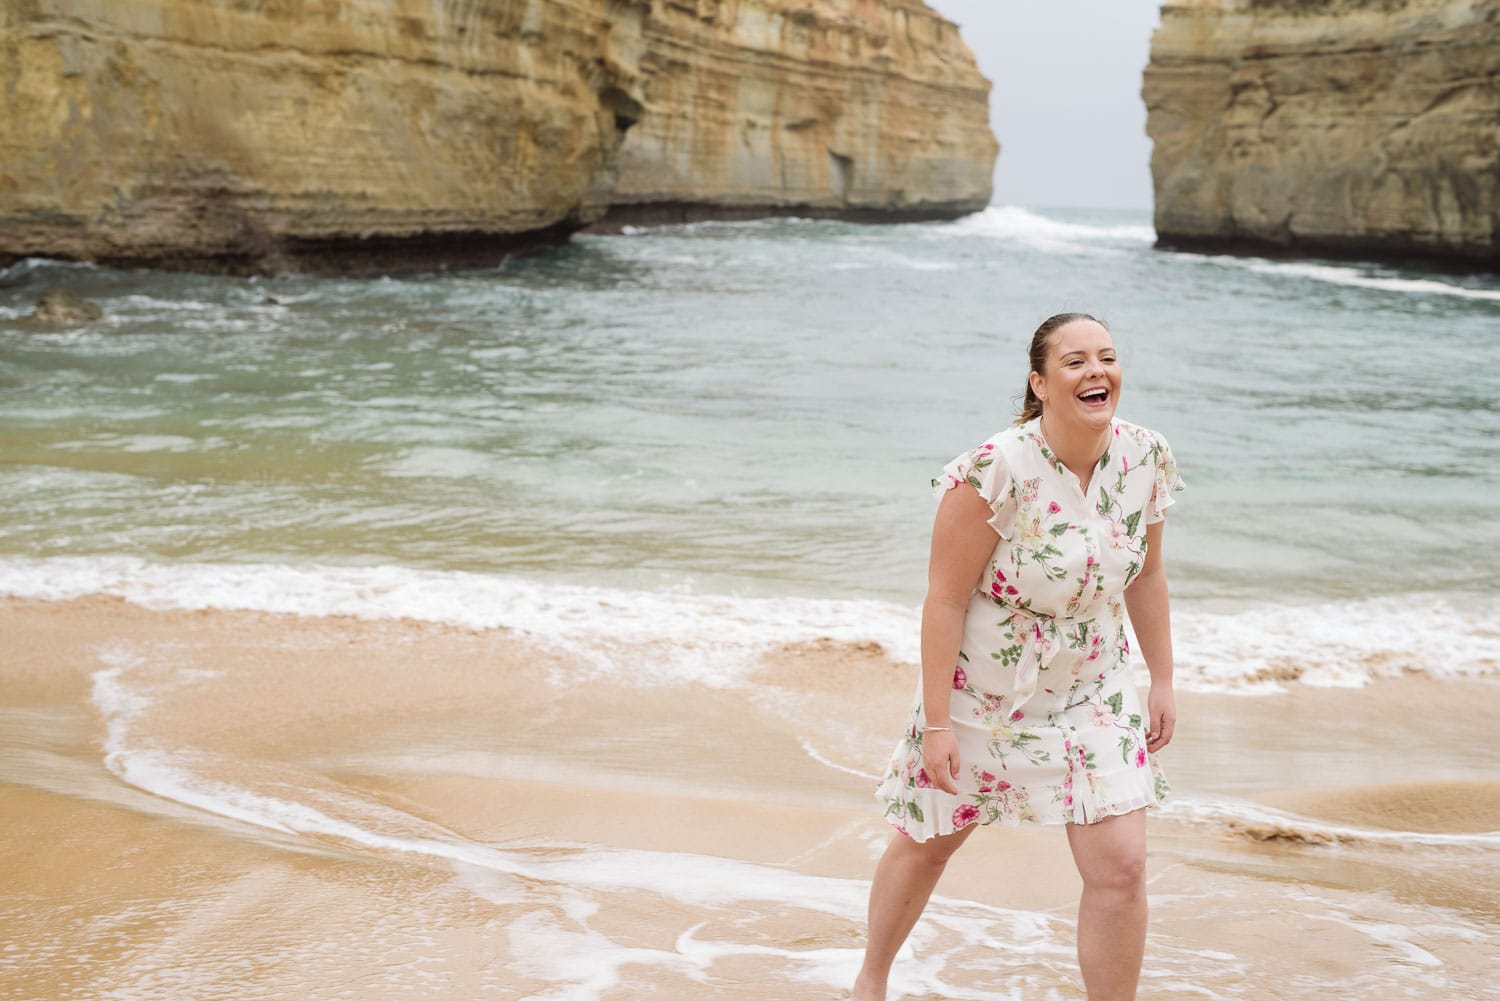 Laughing in the ocean at Loch Ard Gorge